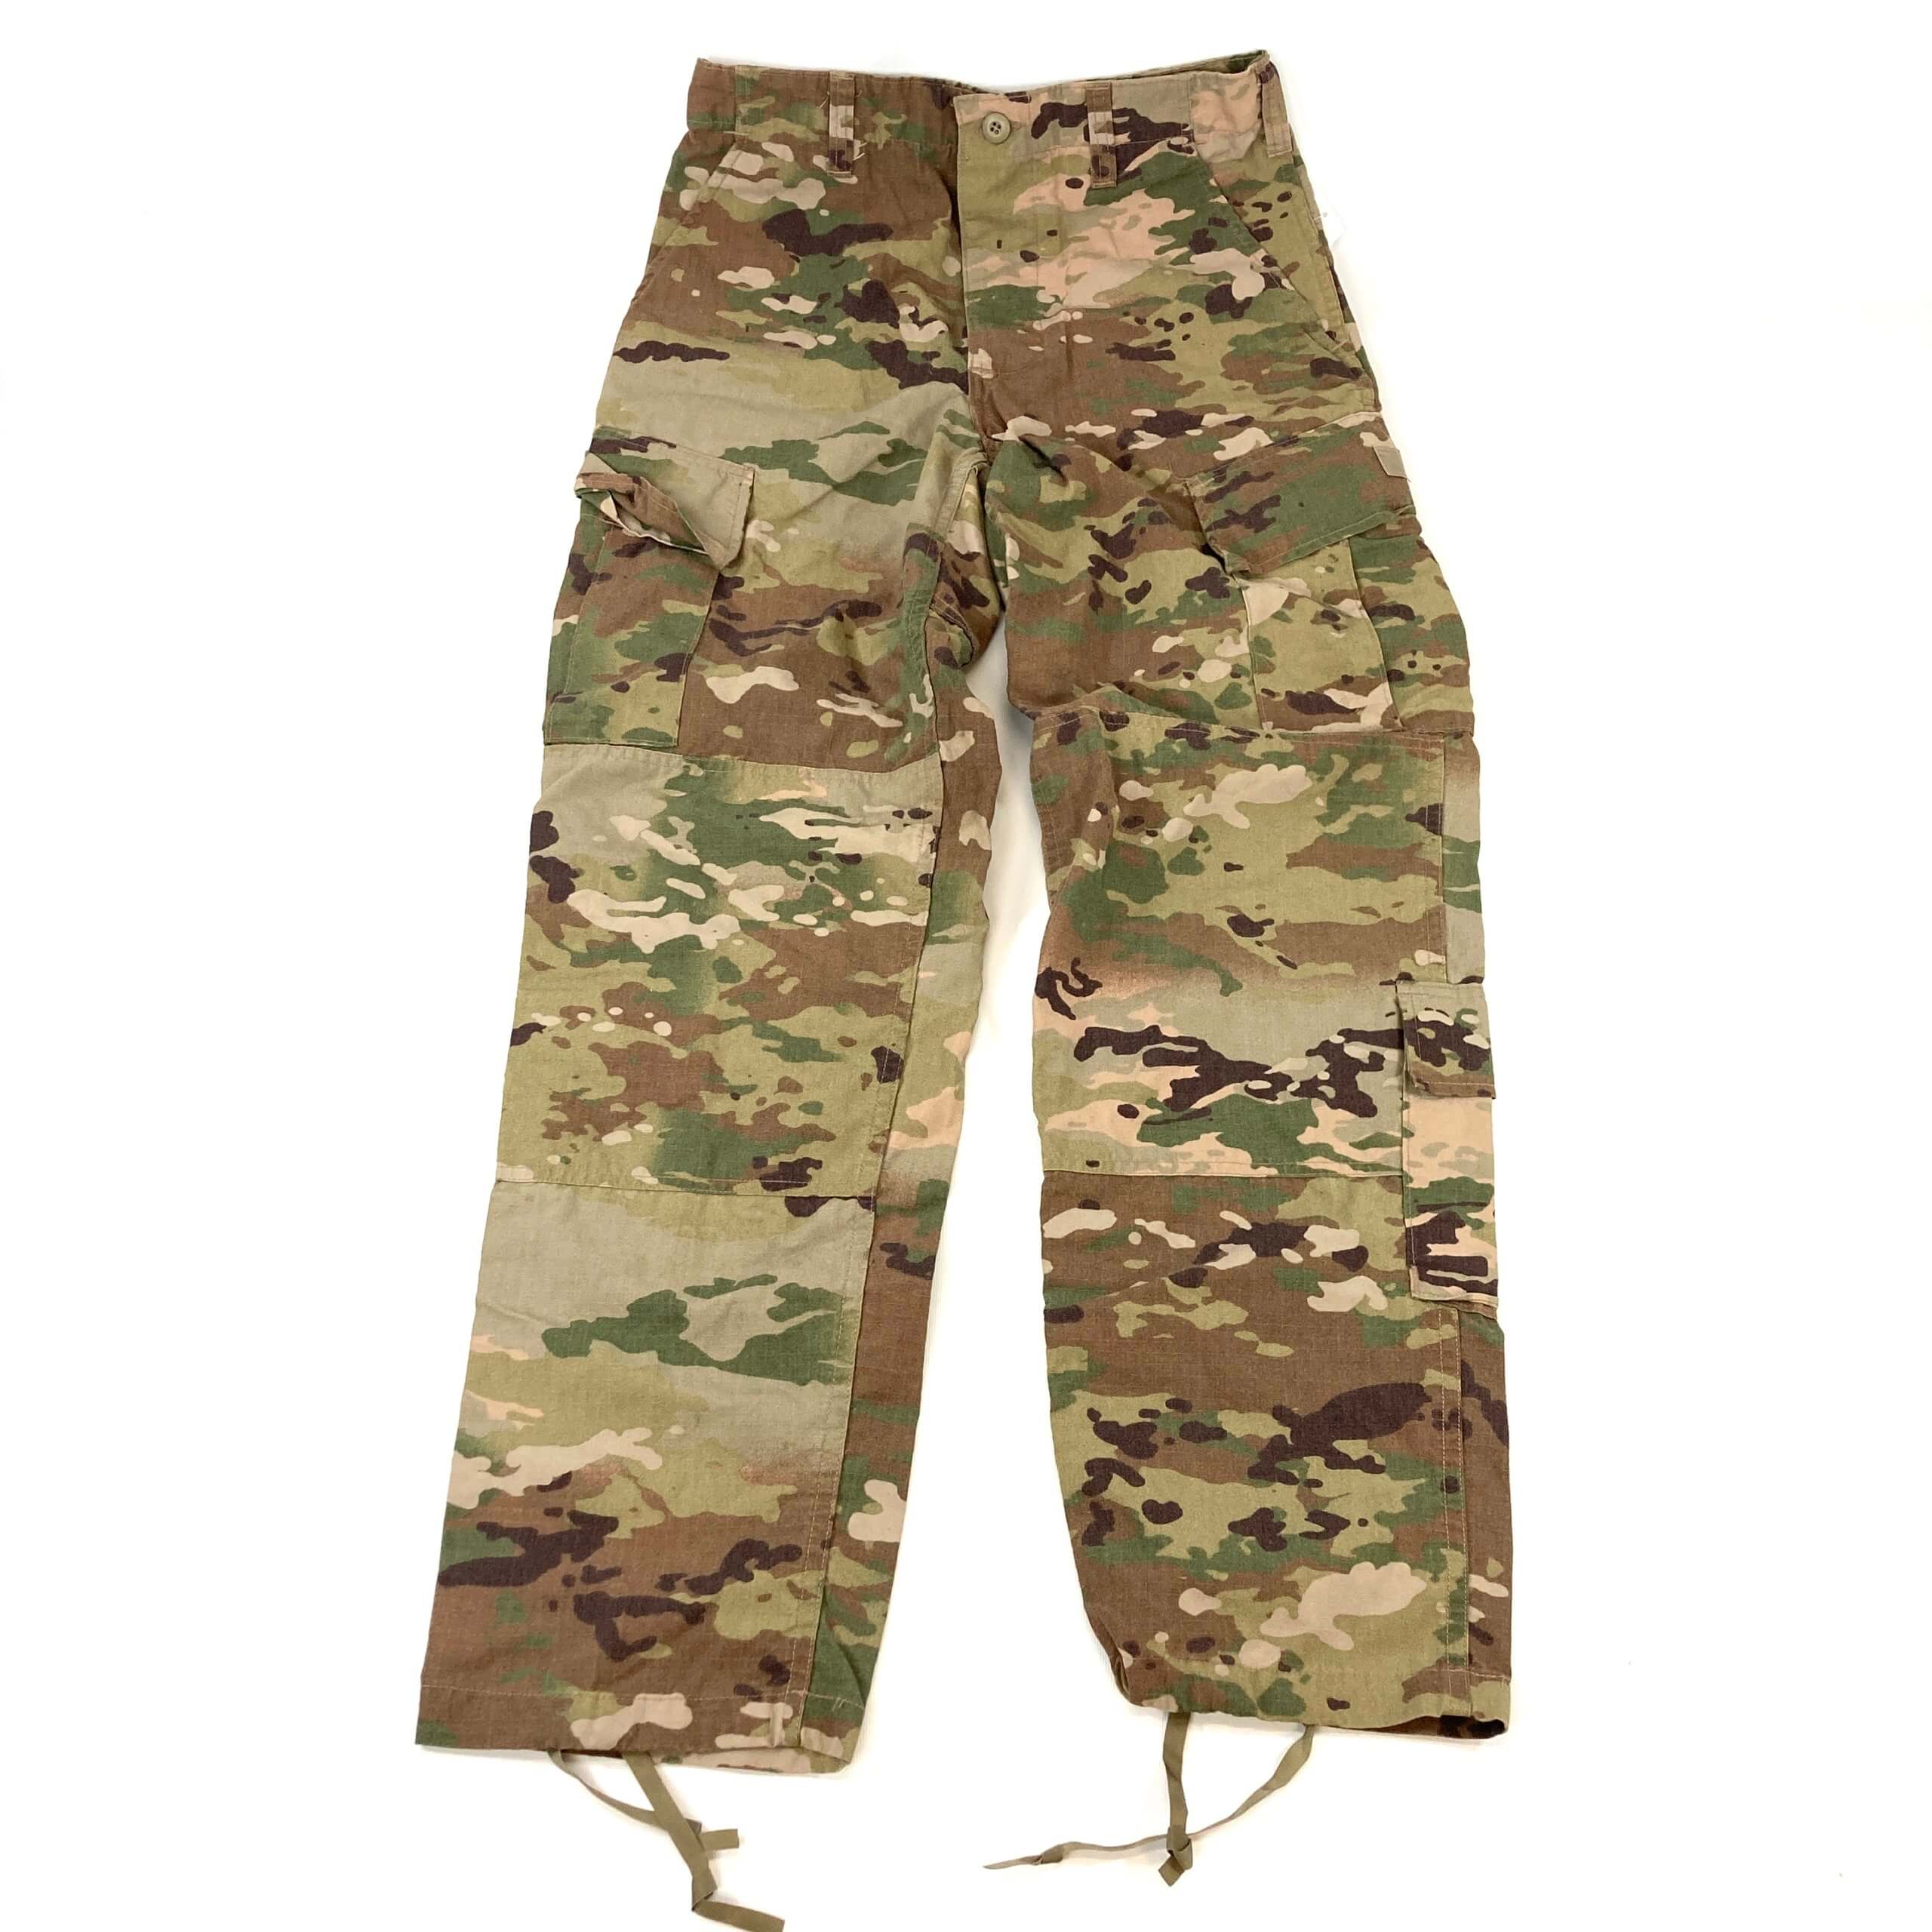 ARMY OCP MULTICAM UNIFORM PANTS  ISSUE INSECT TREATED  EXCELLENT 